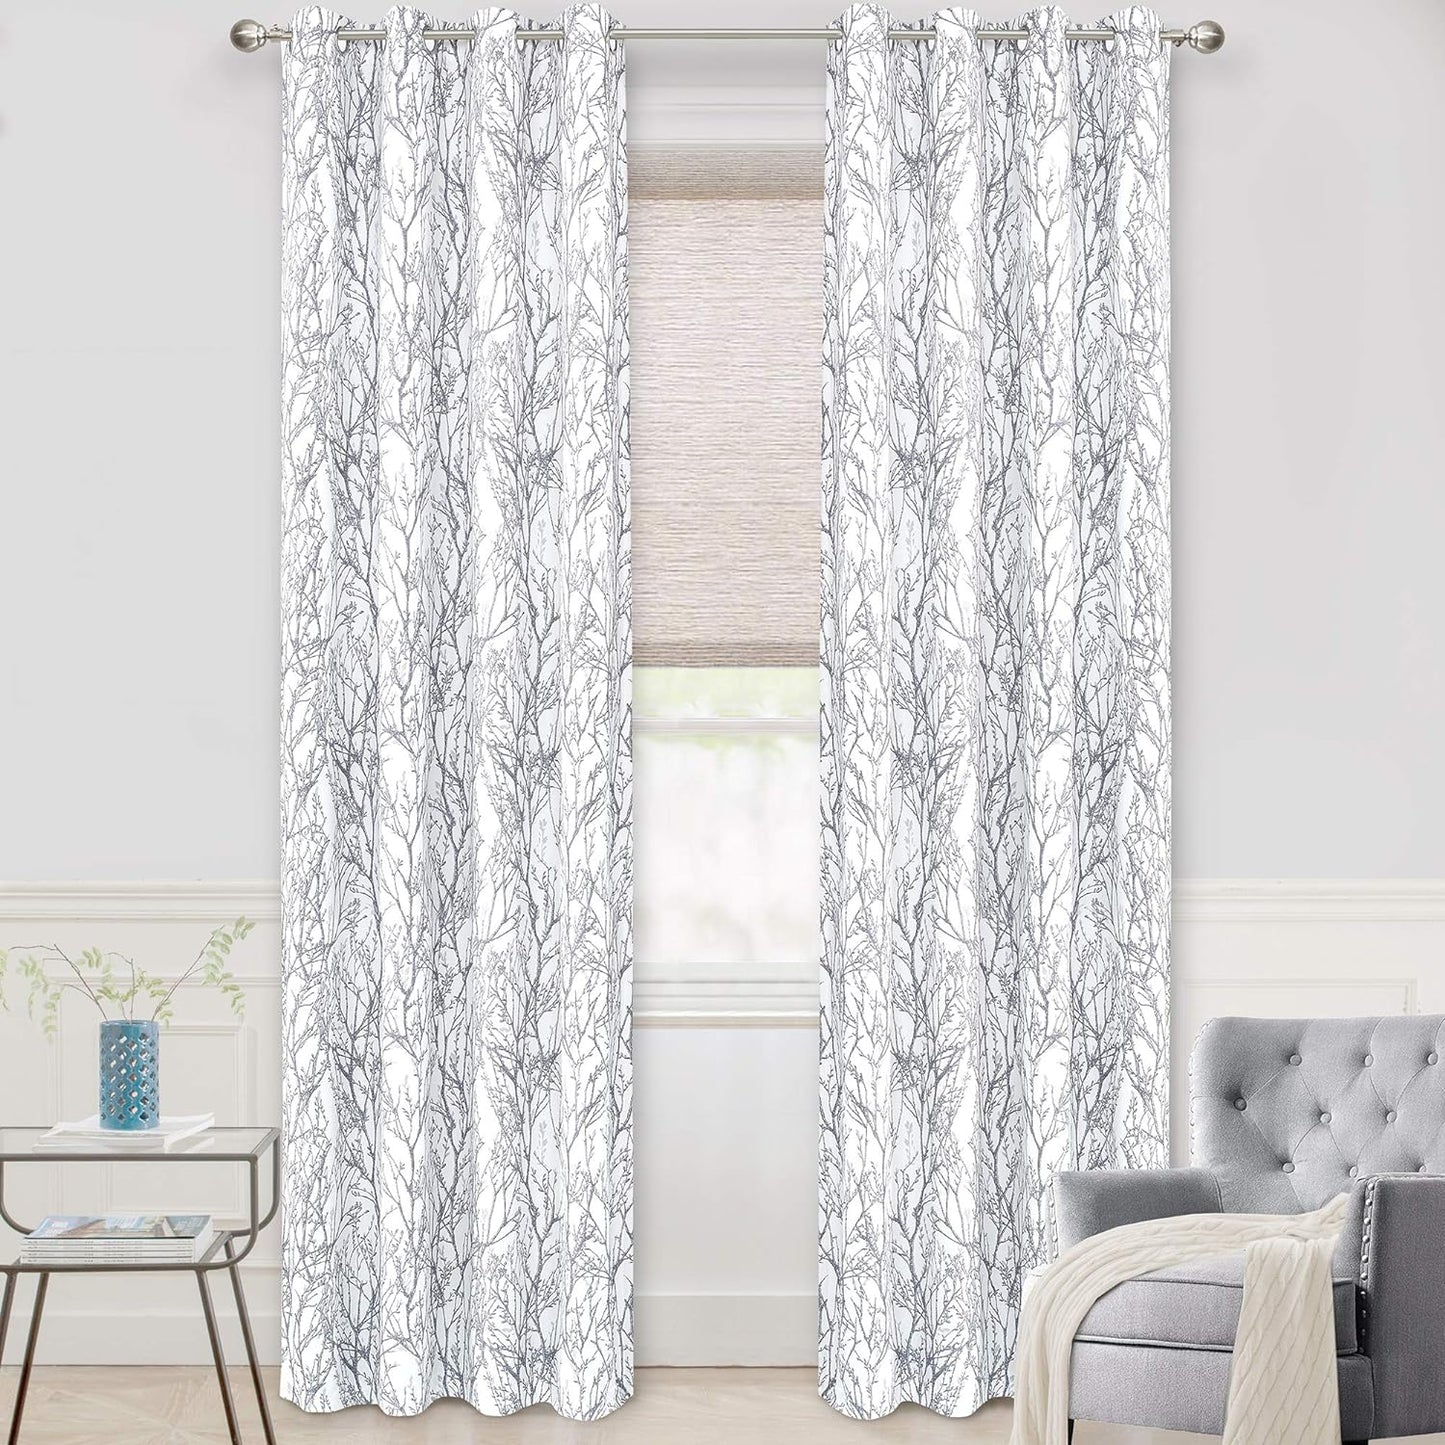 Driftaway Gray White Tree Branch Blackout Curtains for Bedroom Curtains 84 Inch Length 2 Panels Set Grey Branch Lined Window Treatment Thermal Grommet Top Curtain for Living Room Winter Warm Curtain  DriftAway Tree Branch-Gray 52"X120" 